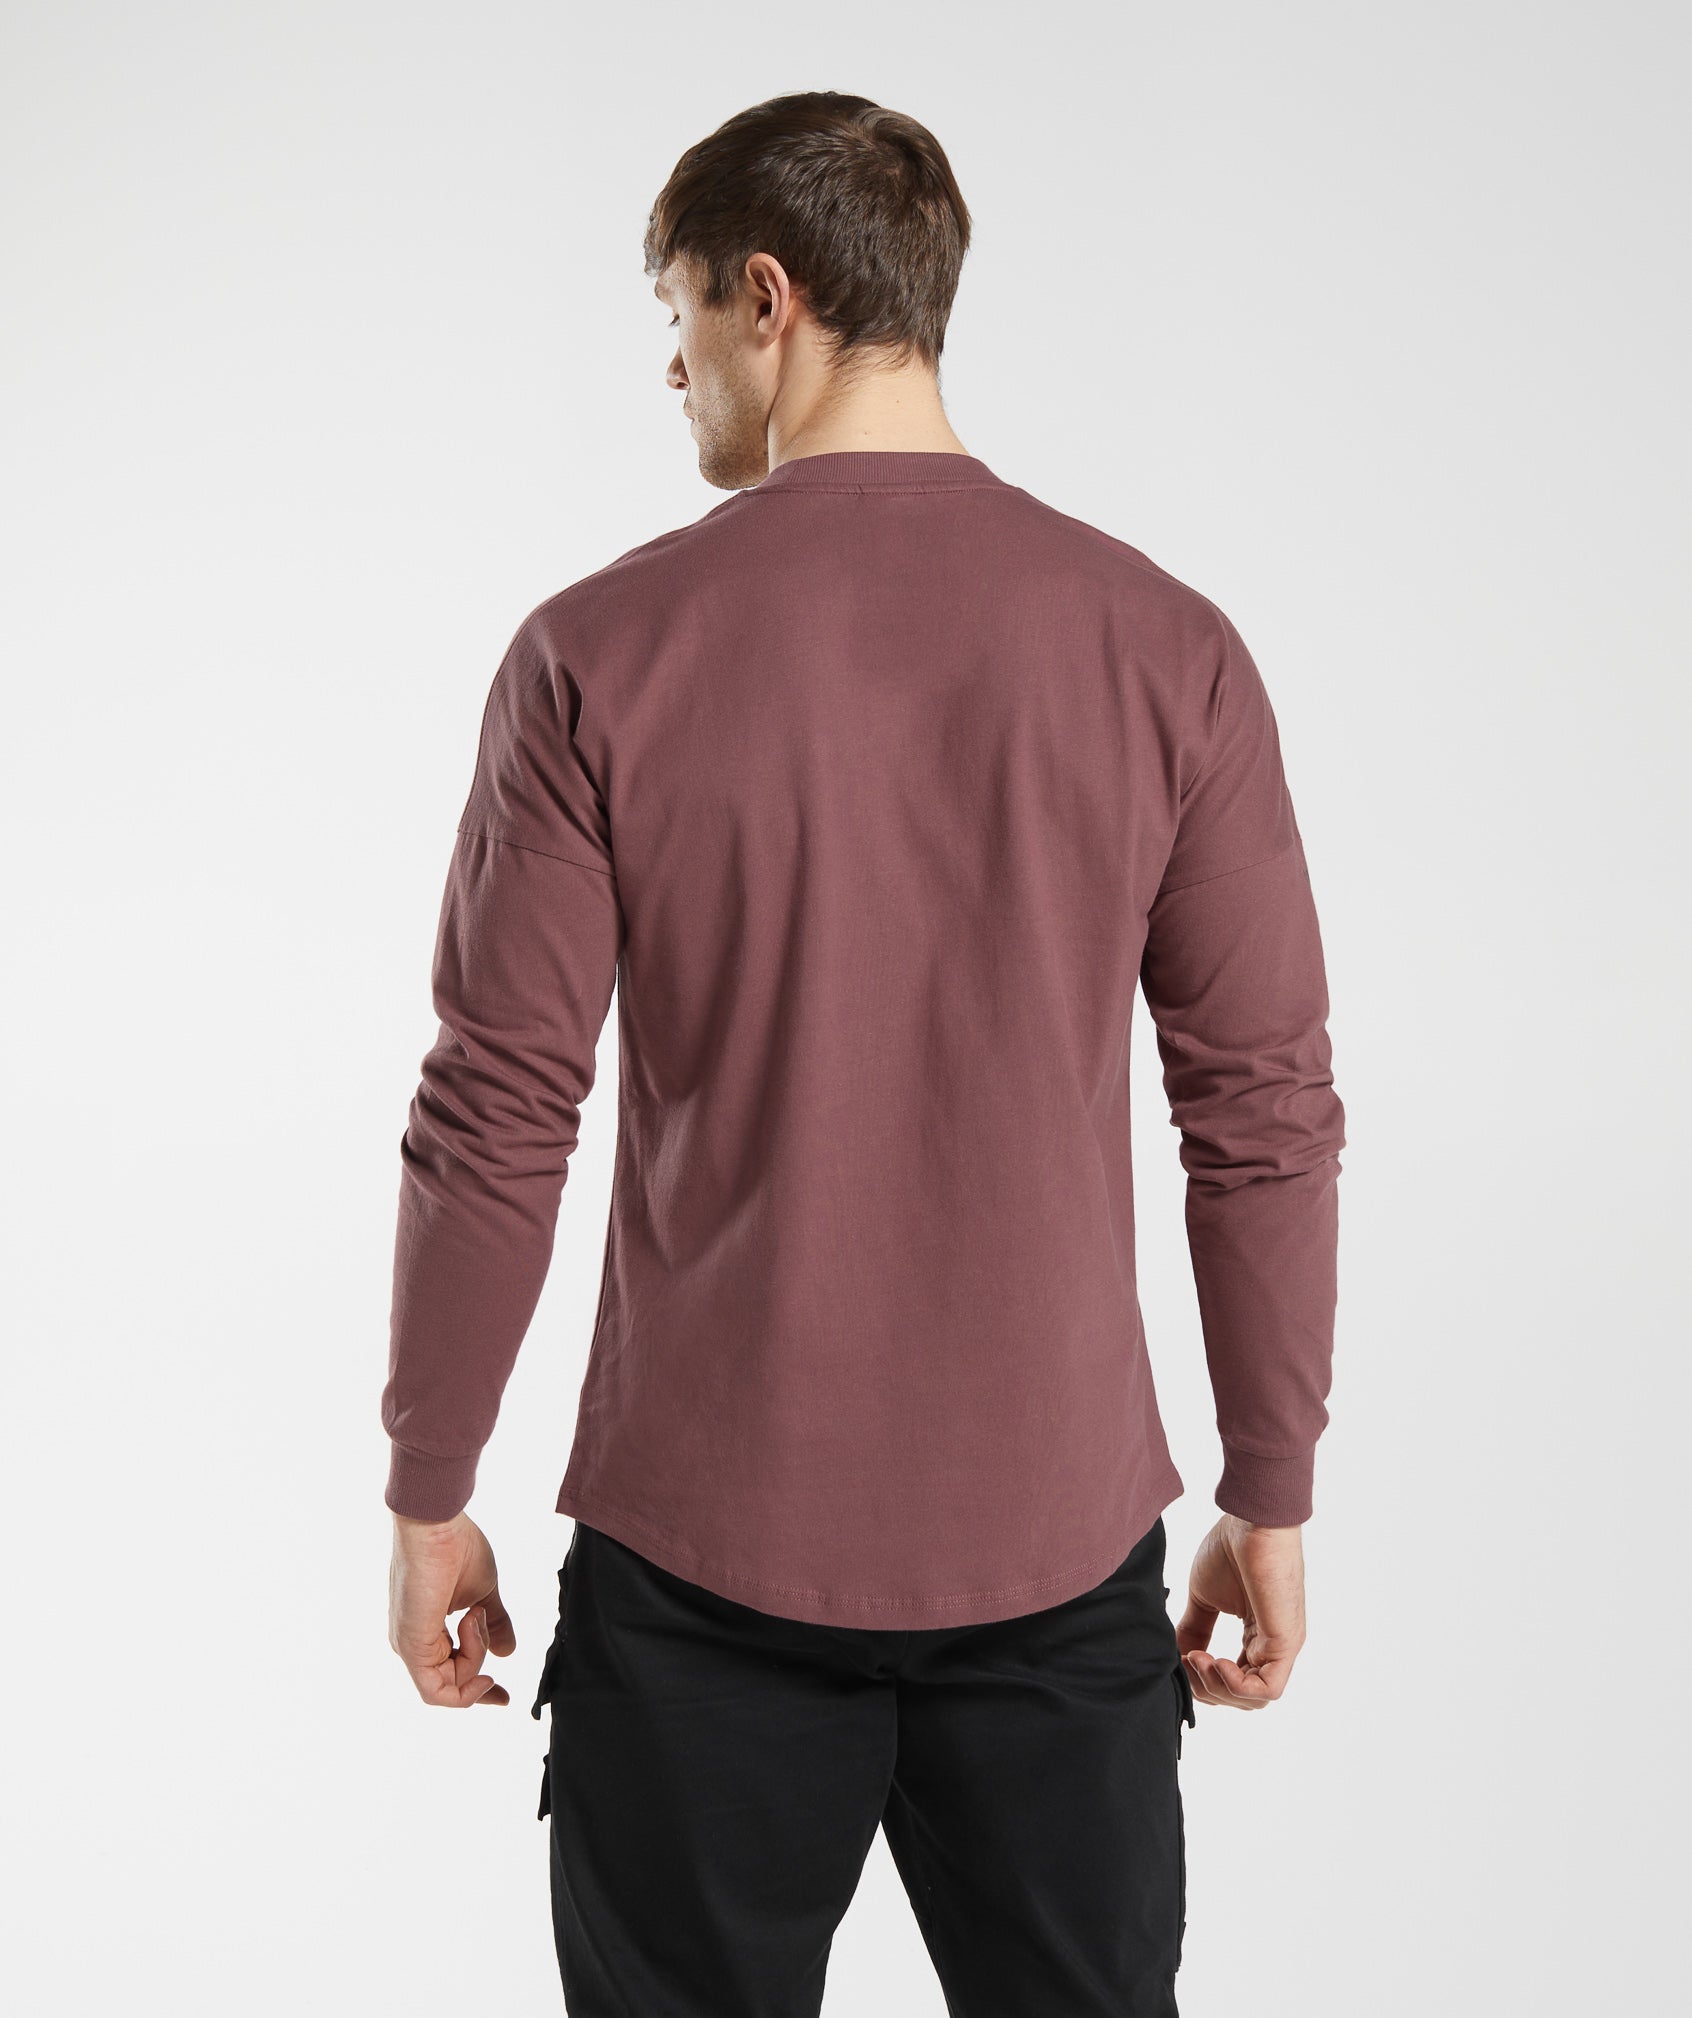 GS x David Laid Oversized Long Sleeve T-Shirt in Magenta Brown - view 2